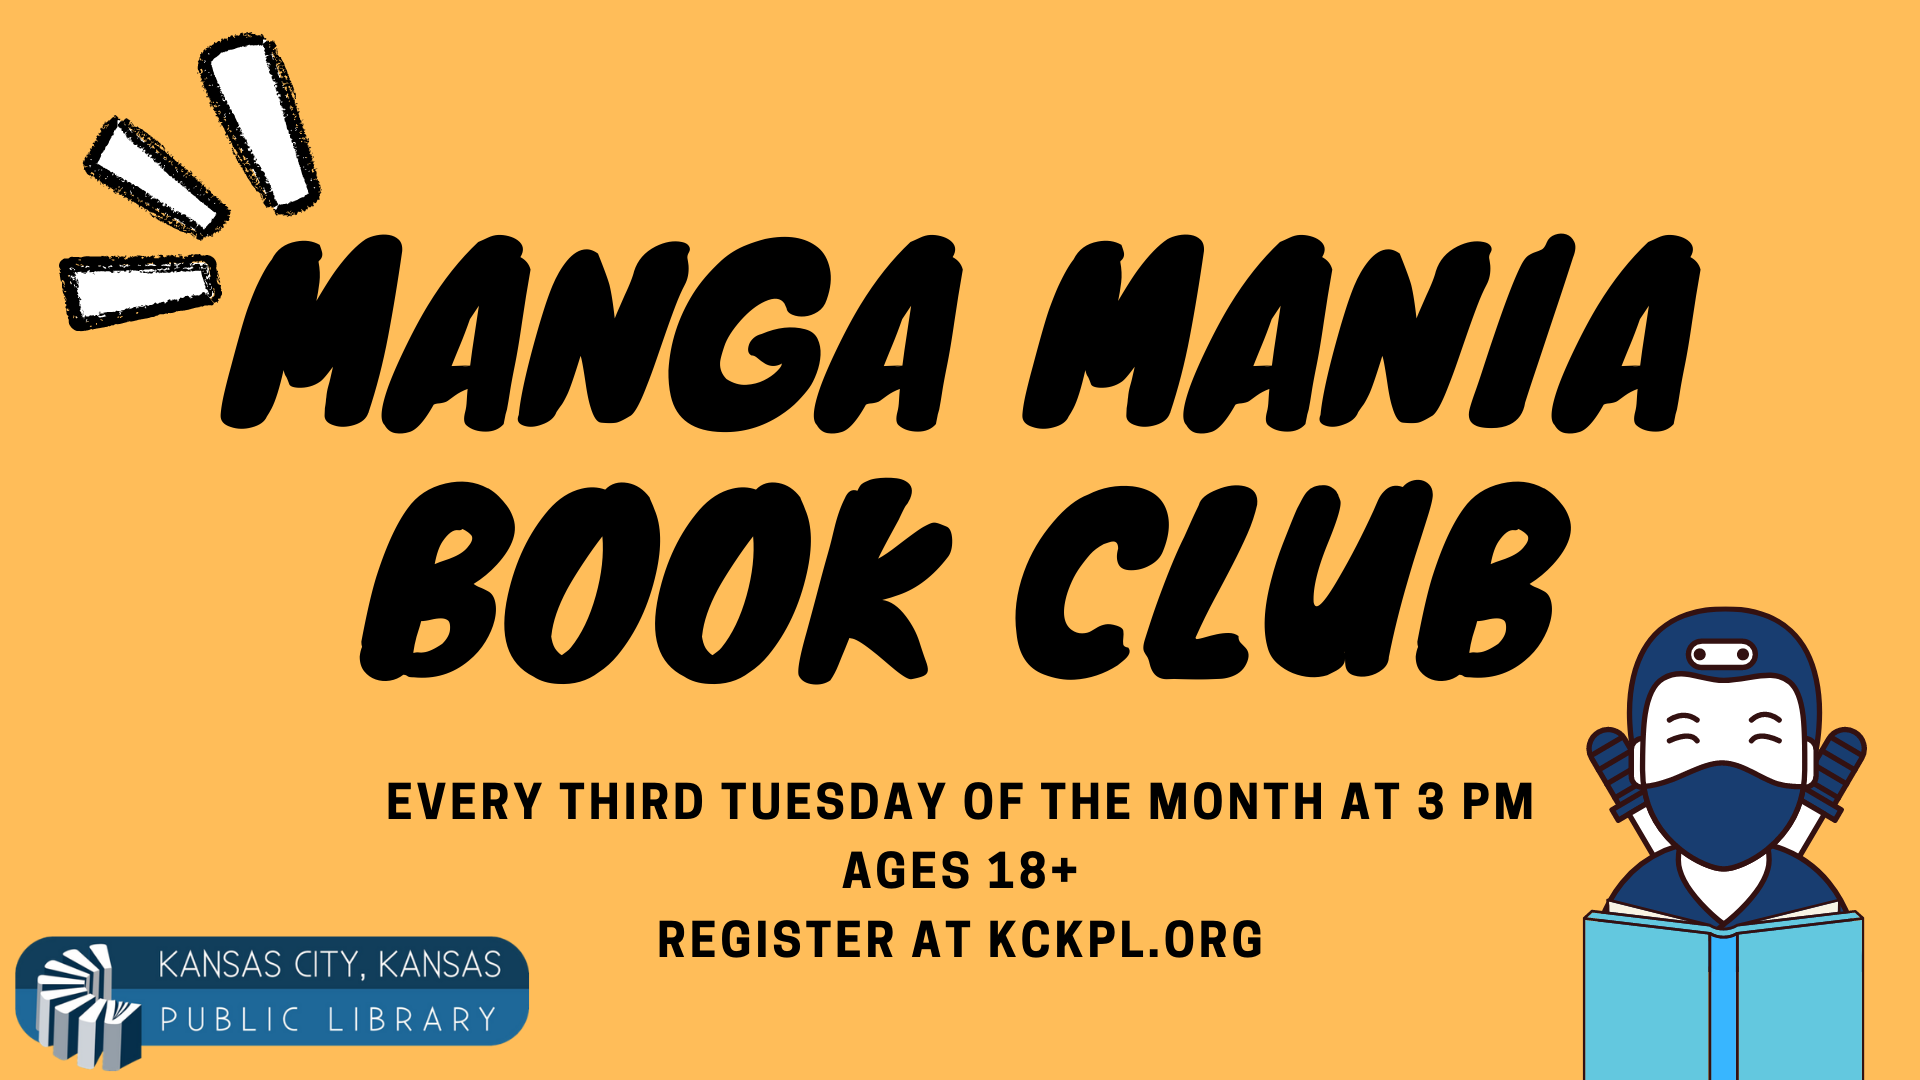 Manga Mania Book Club, Every third Tuesday of the month at 3 pm, ages 18 and up, register on kckpl.org